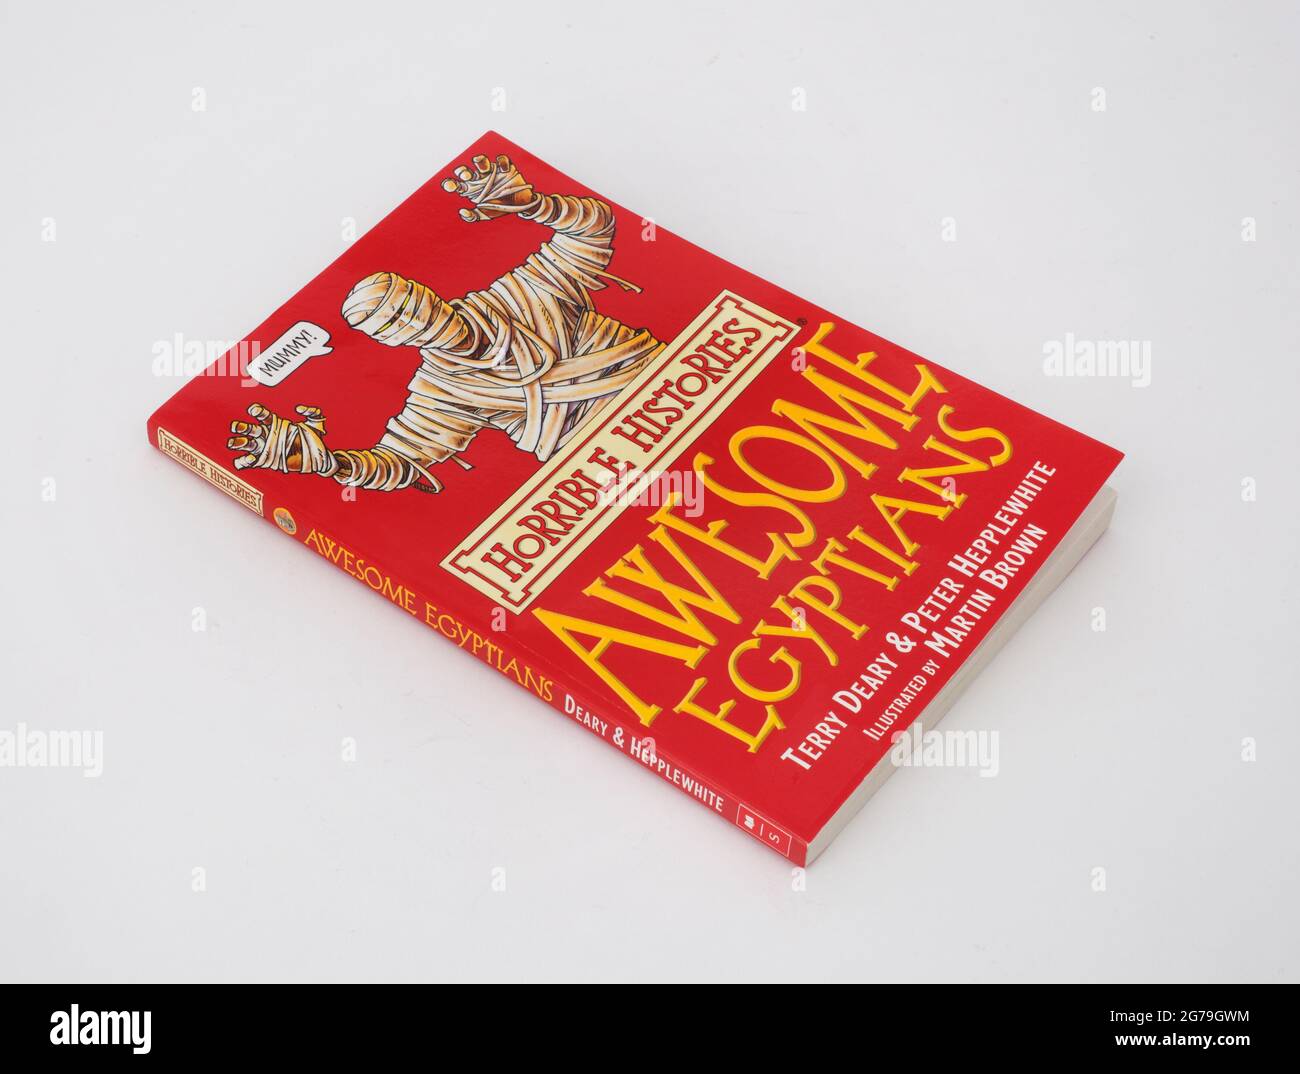 Das Buch Horrible Histories, Awesome Egyptians von Terry Deary Stockfoto